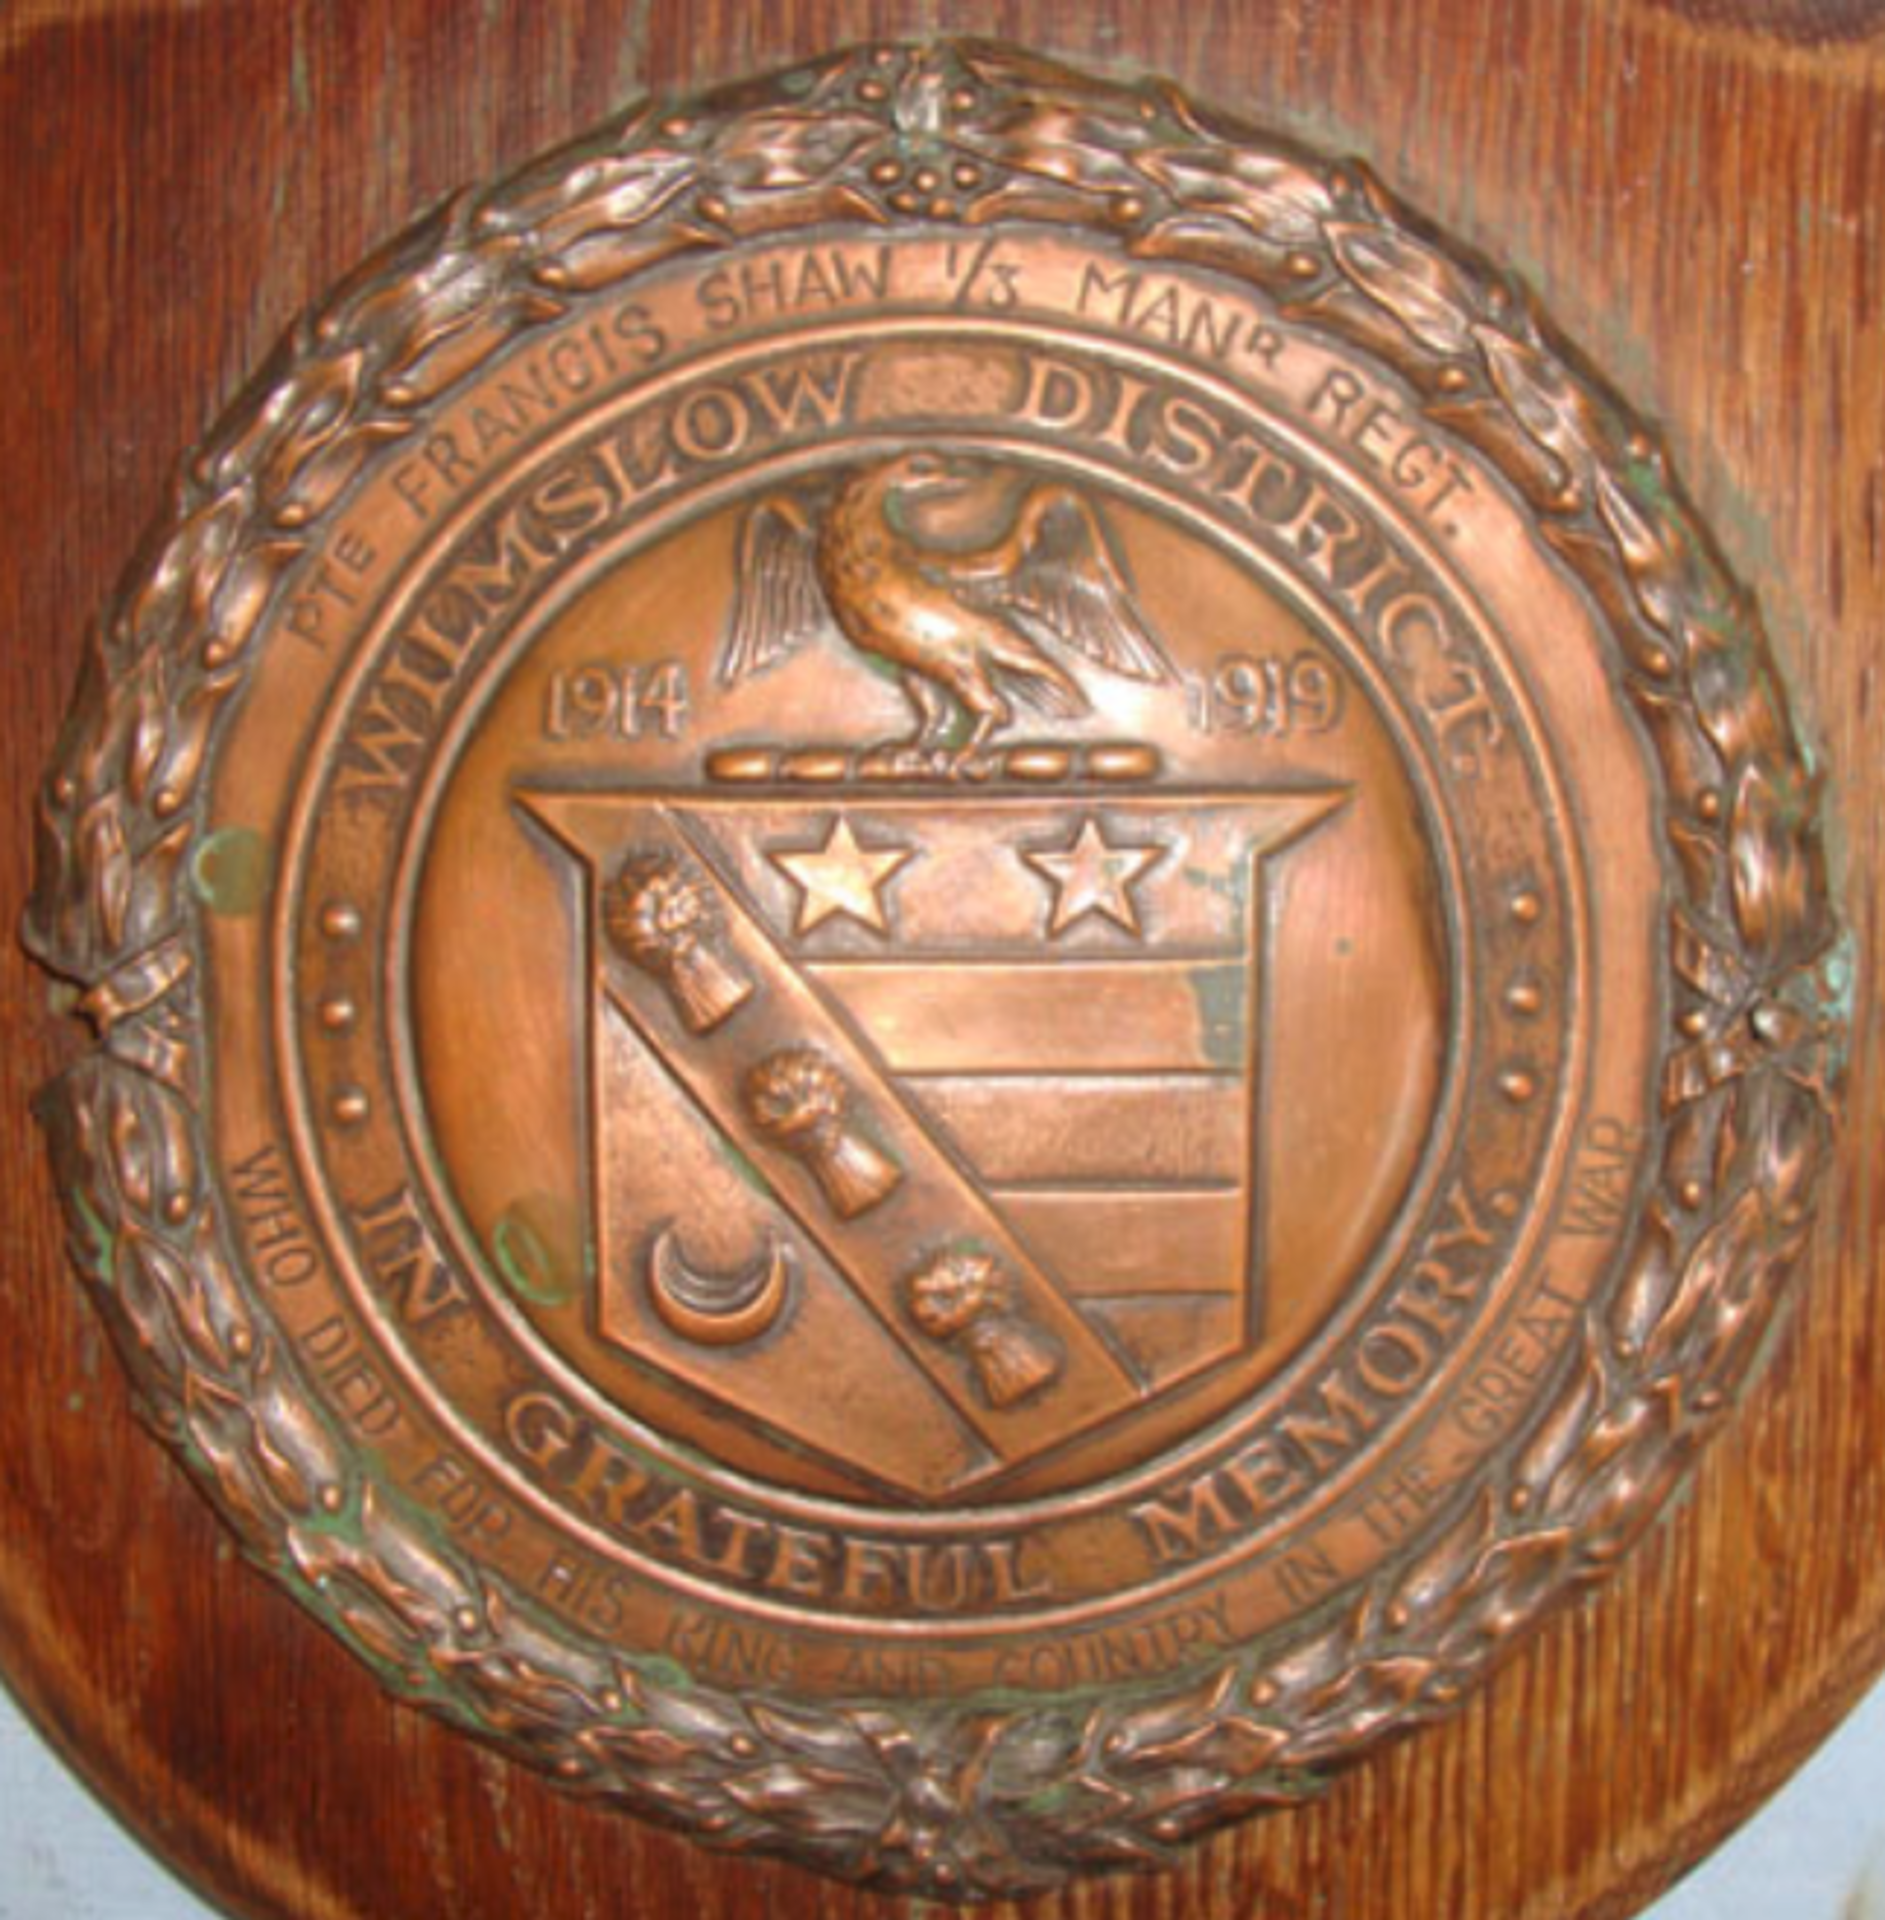 WW1 Wilmslow District Memorial Shield With Copper Centre Boss - Image 2 of 3